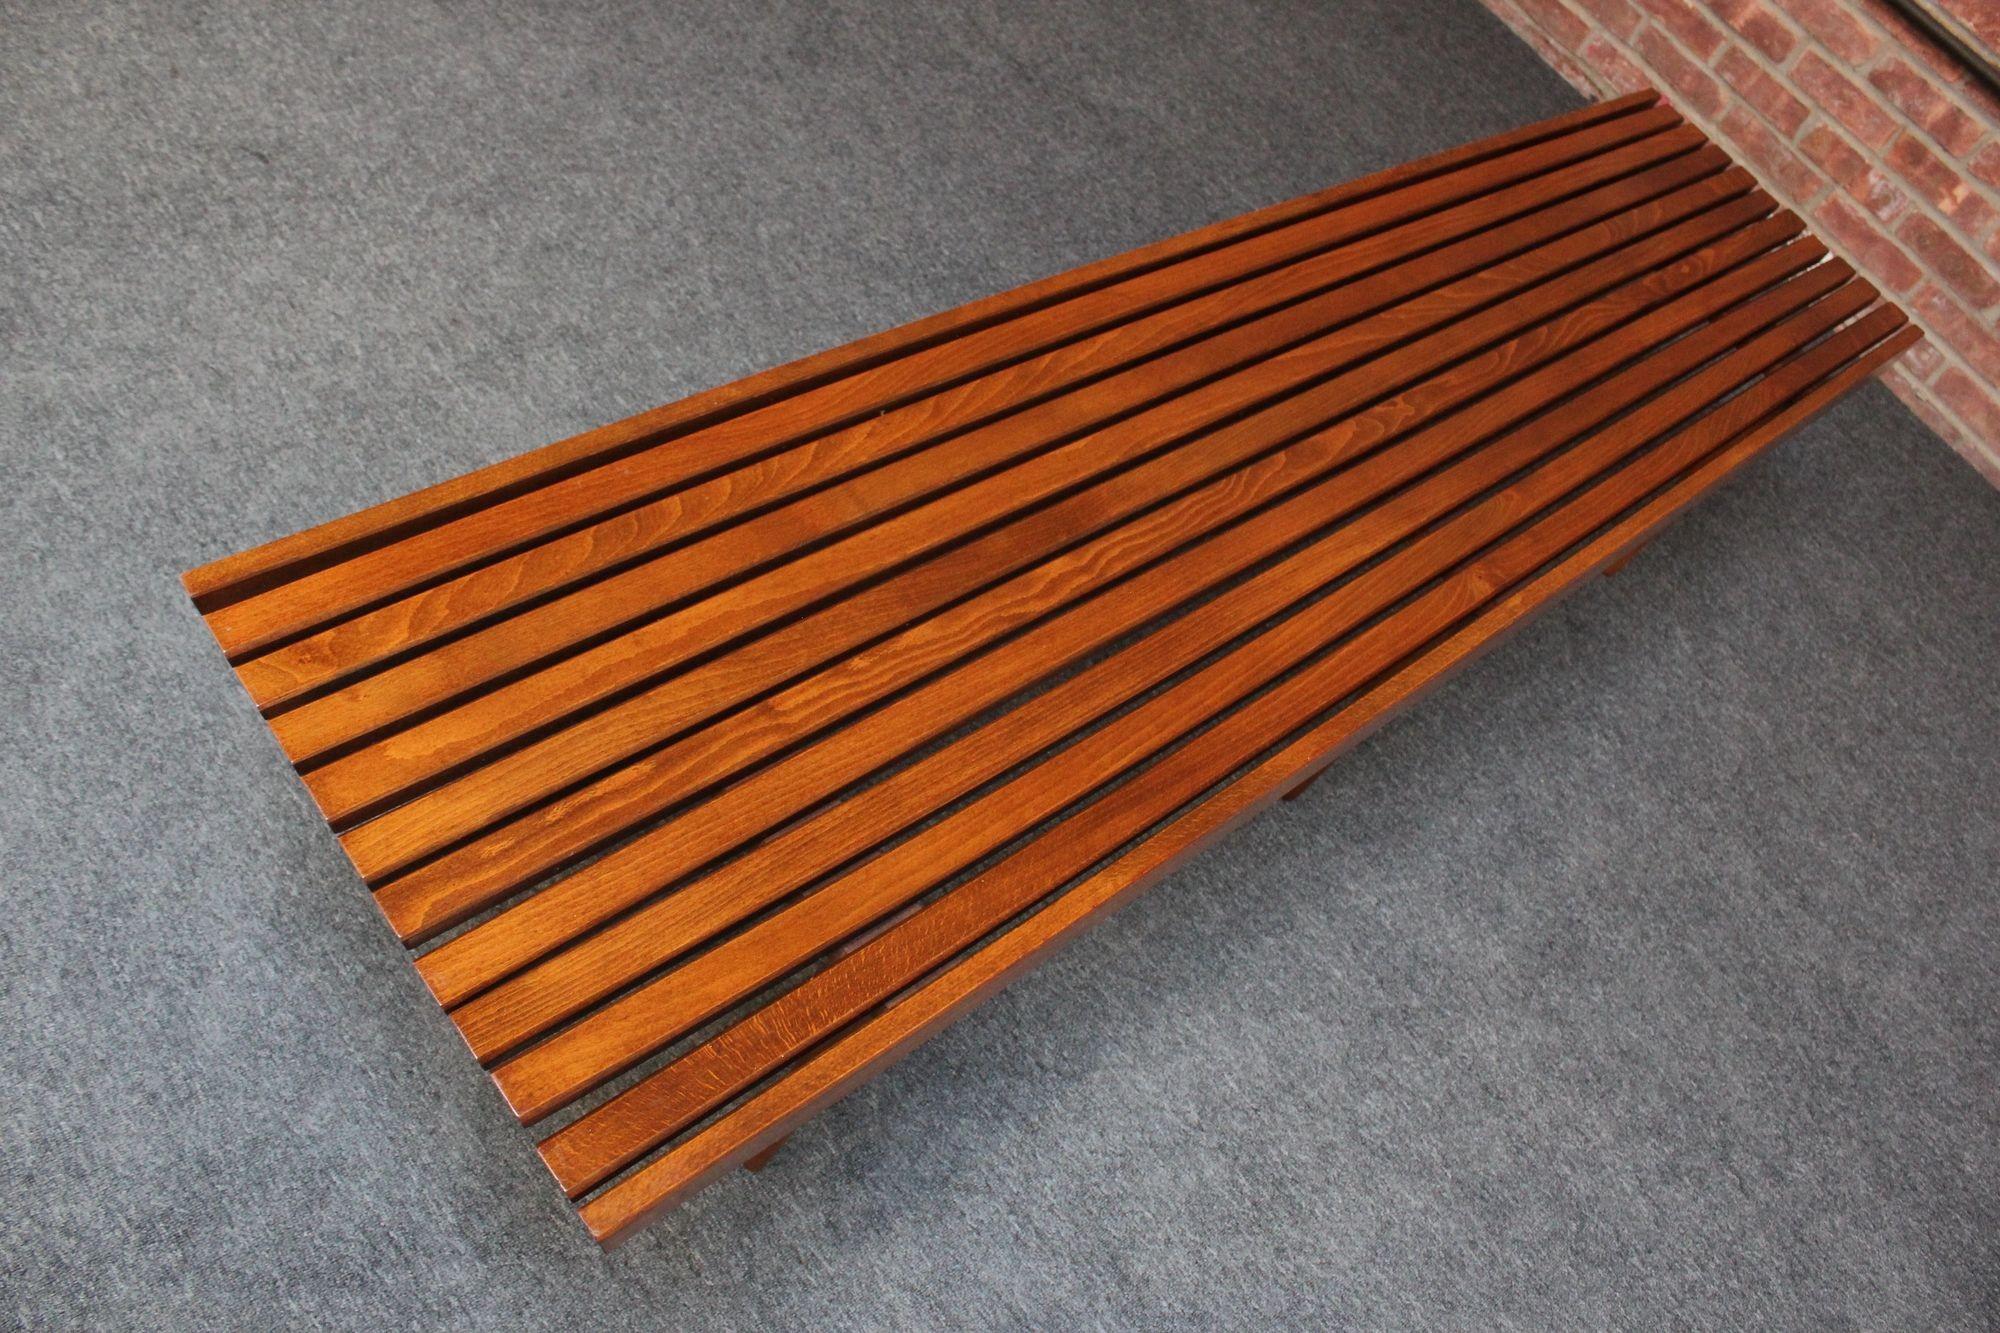 American Long Mid-Century Modern Walnut Slatted Bench / Coffee Table with Tapered Legs For Sale